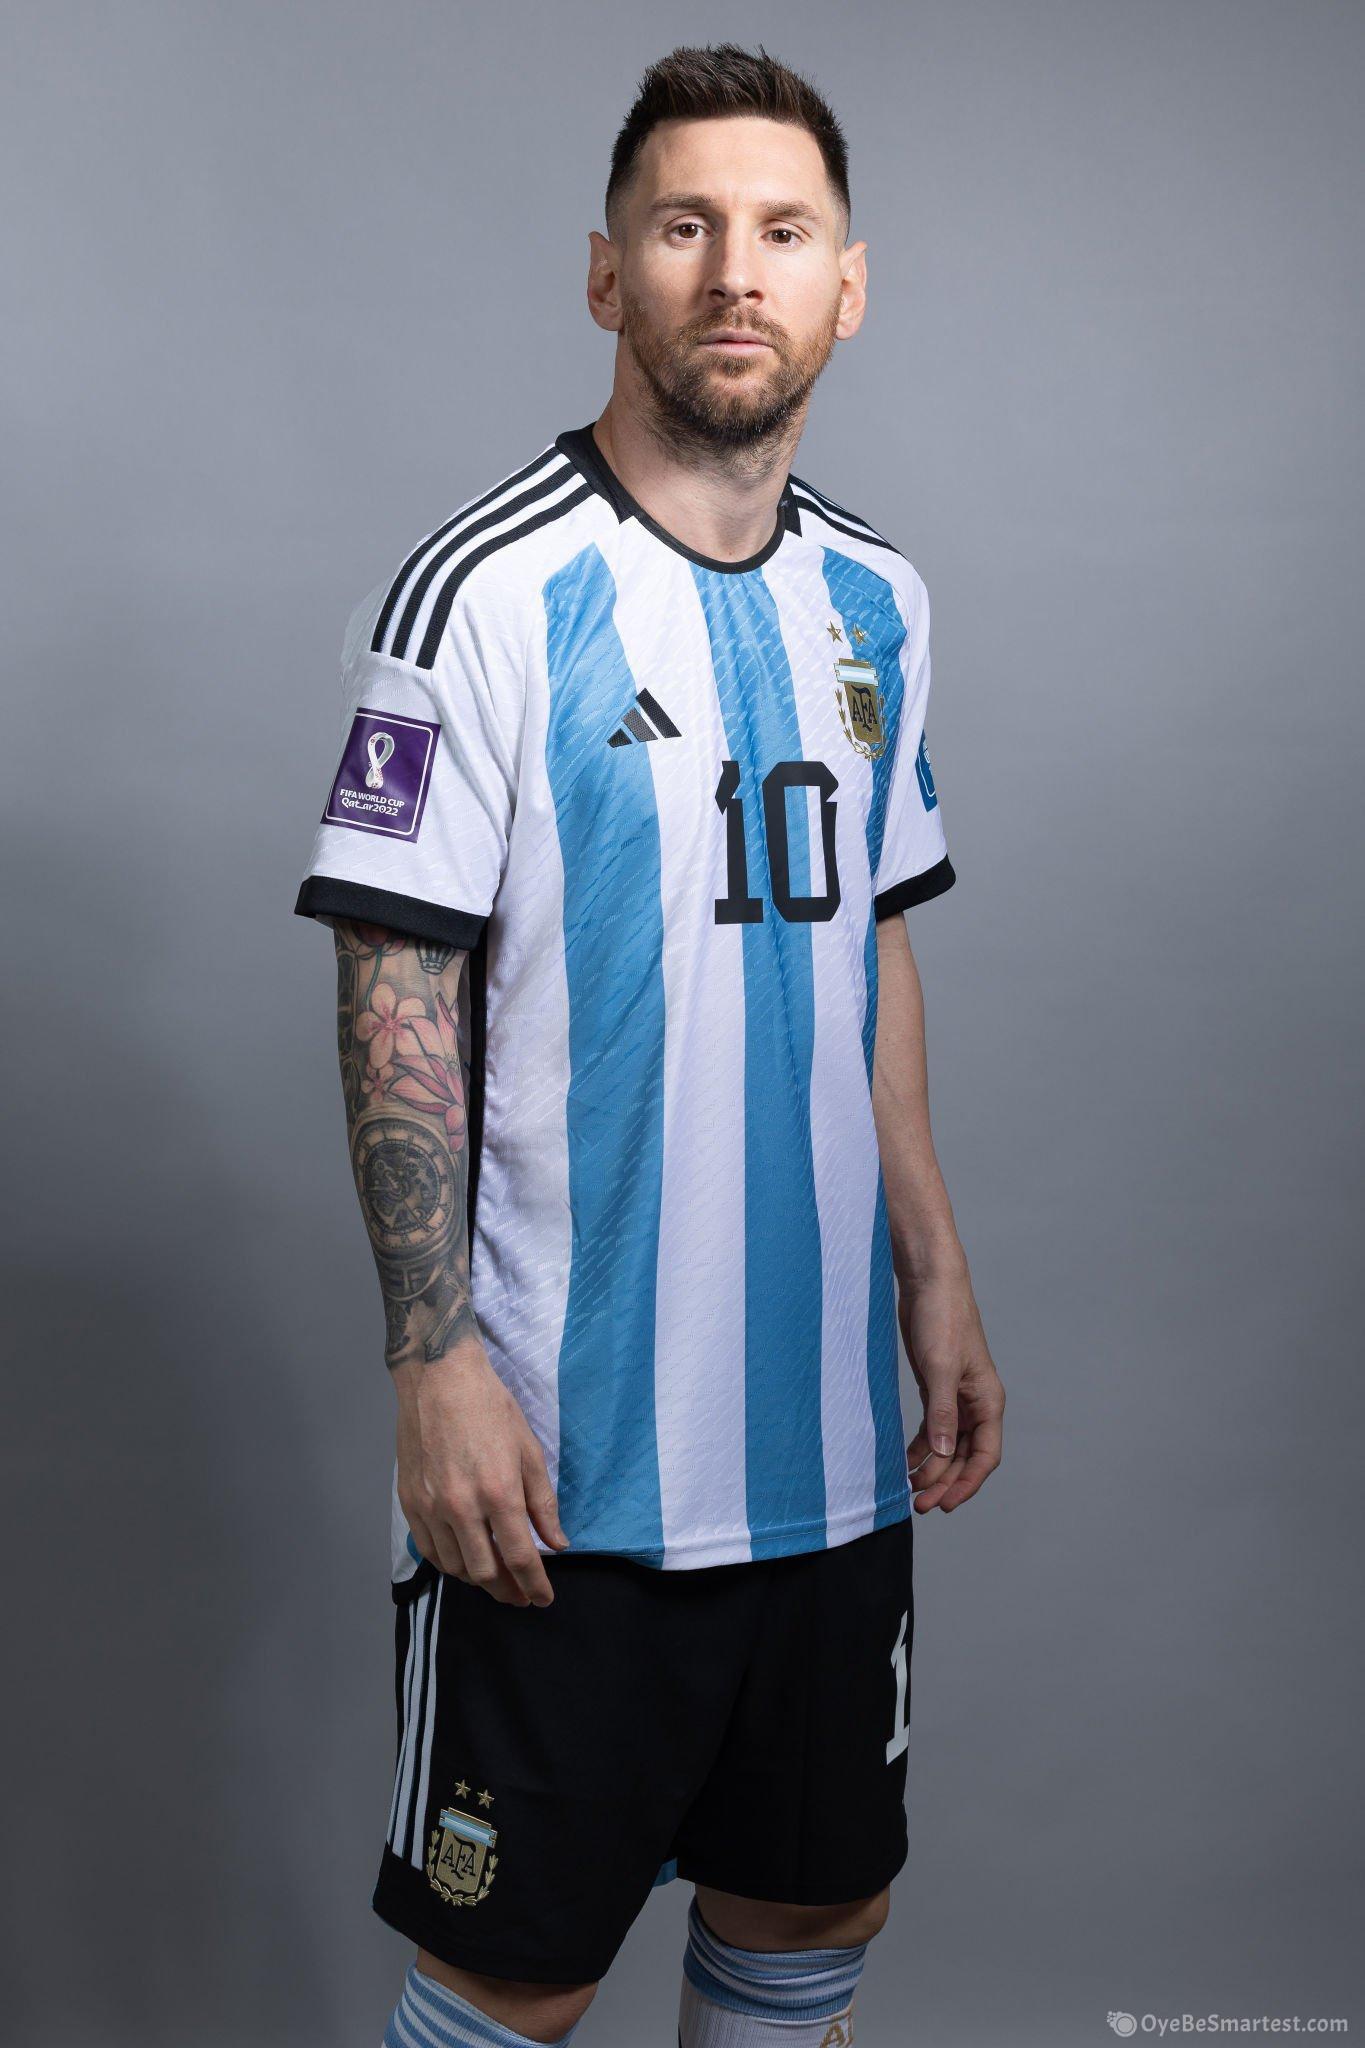 Messi 2022 World Cup Wallpapers - Top Free Messi 2022 World Cup ...